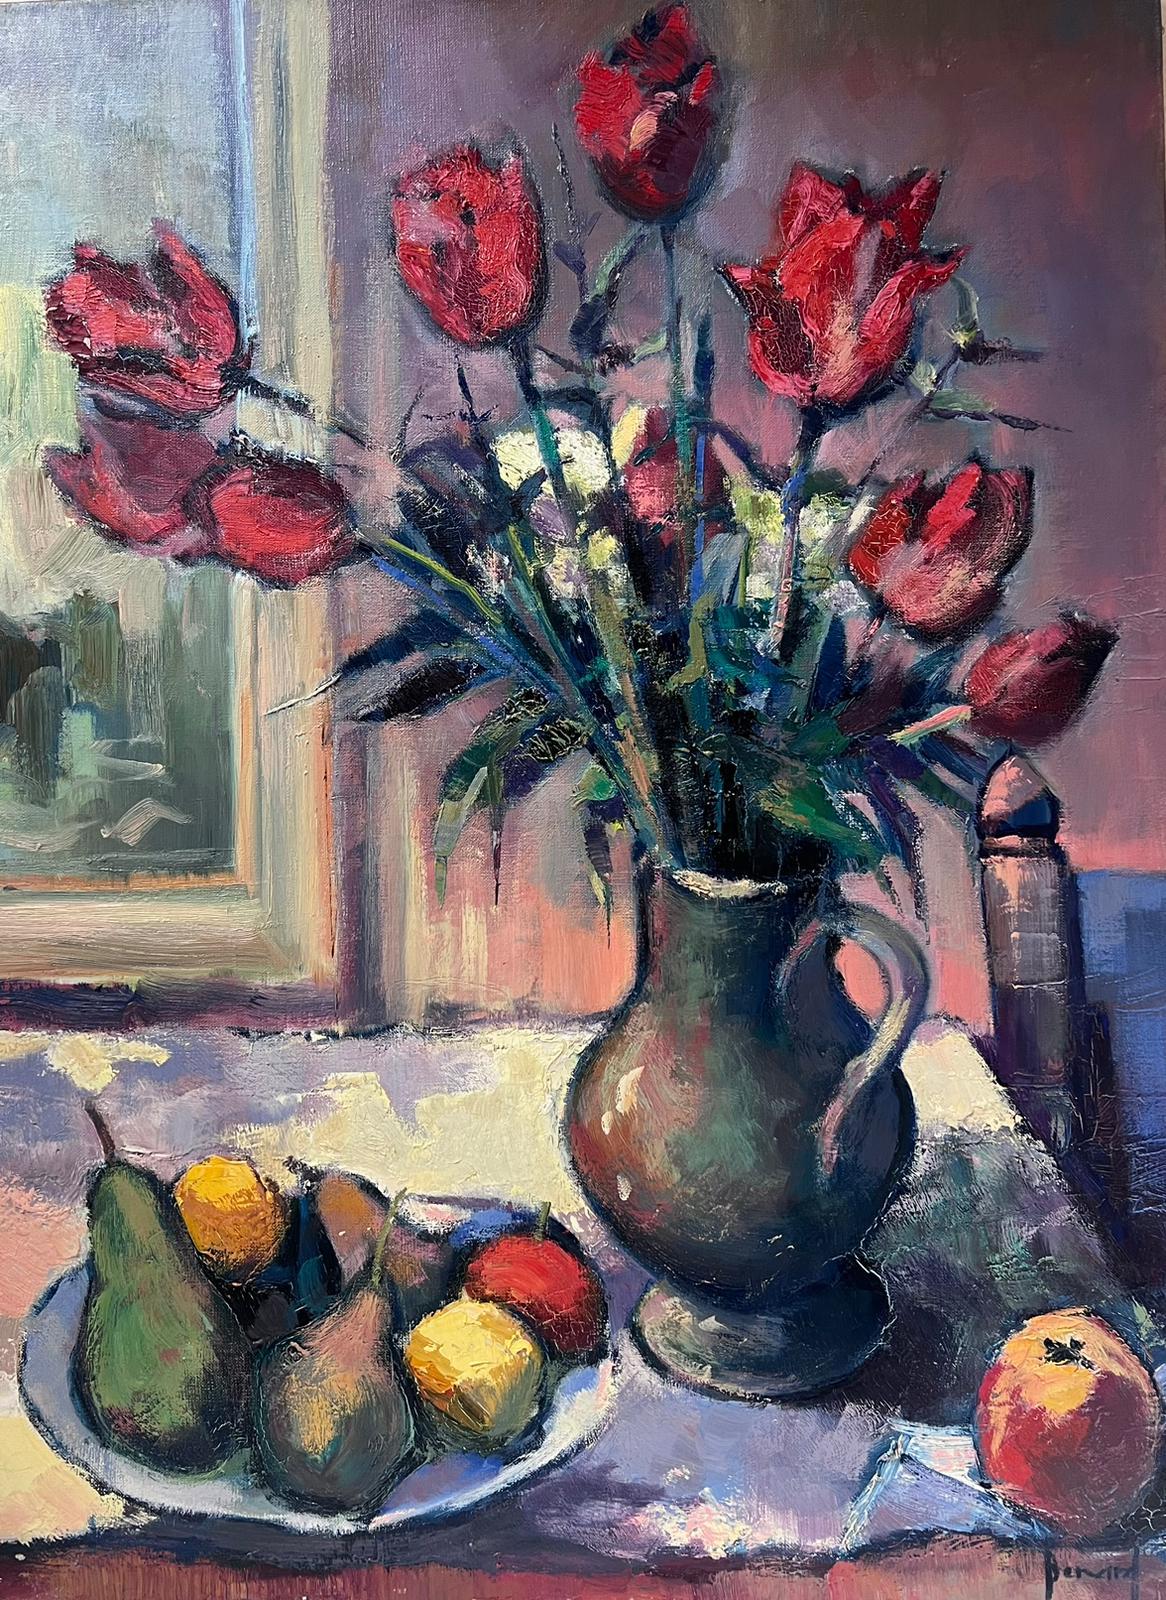 Guy Benard Interior Painting - Large French Post-Impressionist Signed Oil Tulips, Apples & Pears Still Life